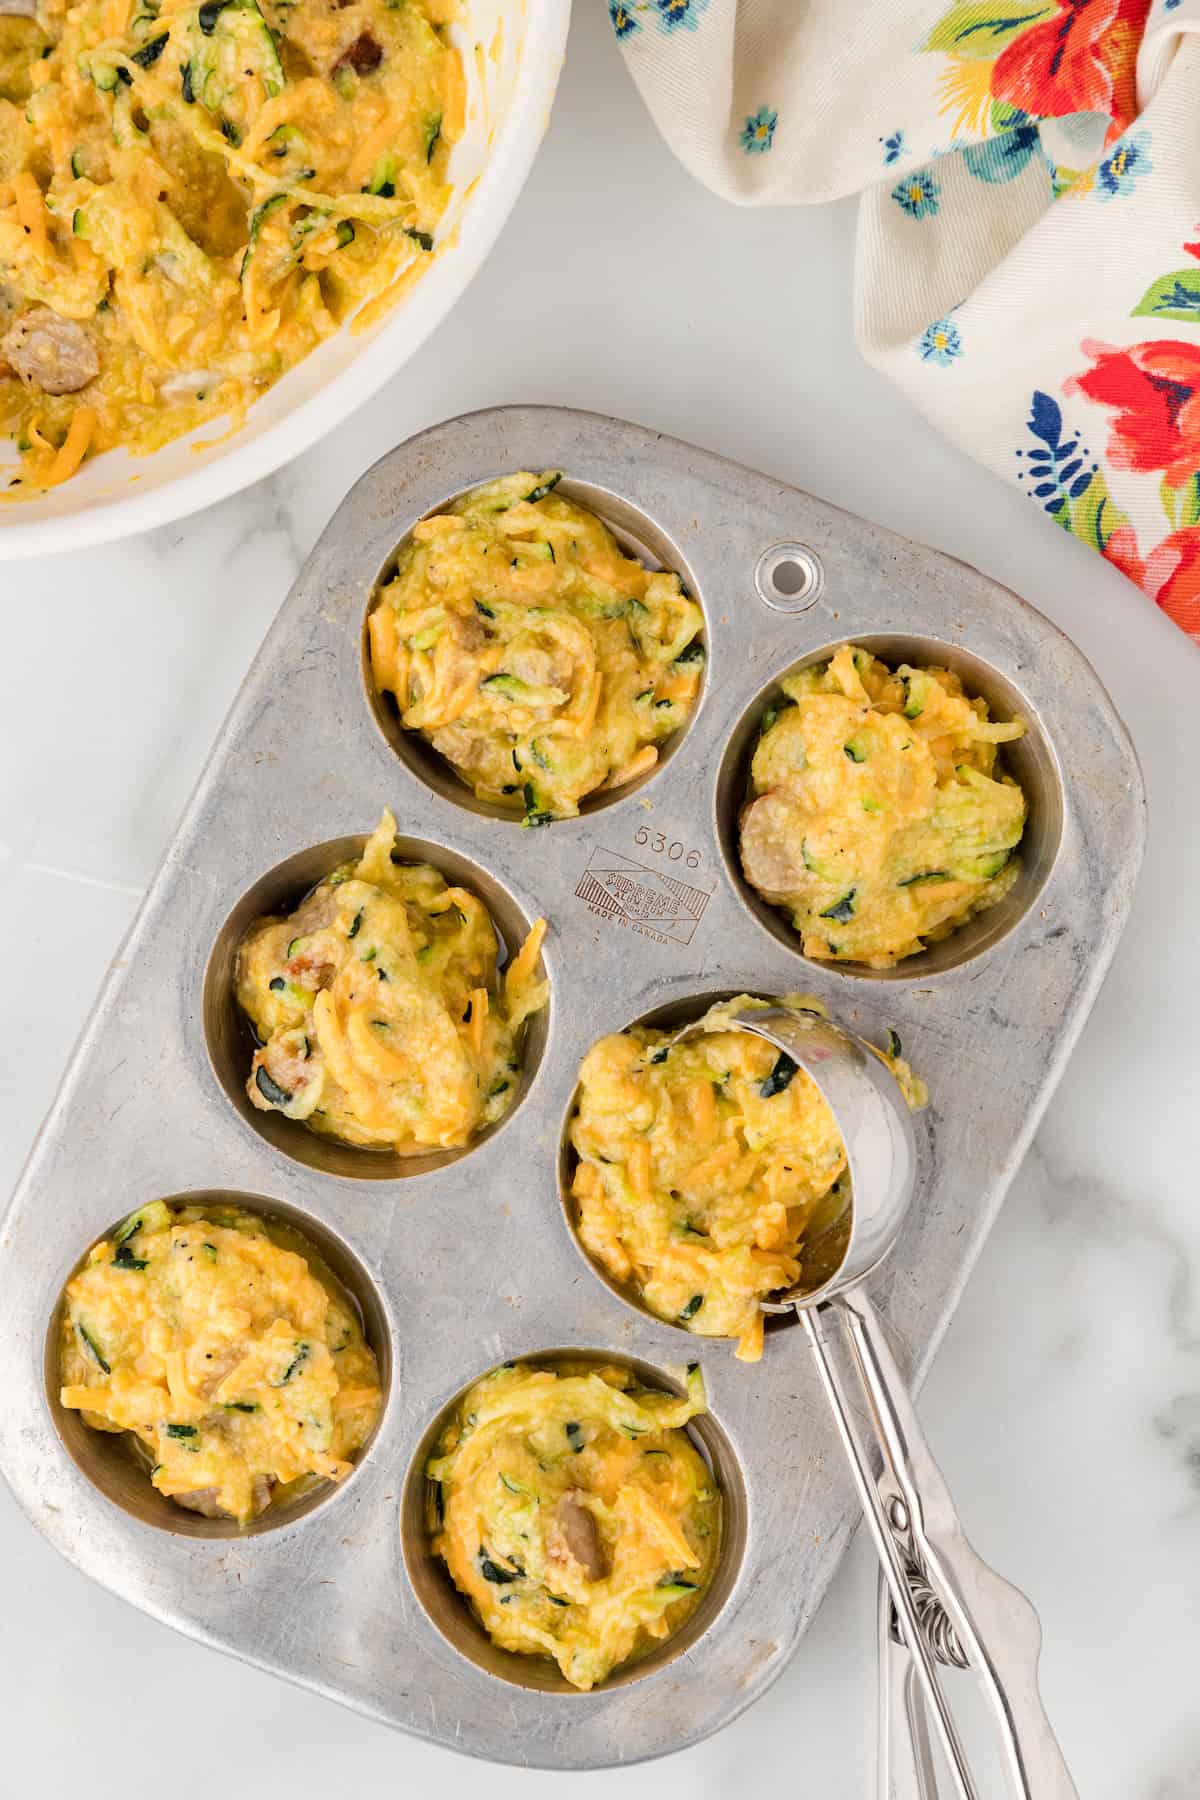 spoon the egg, zucchini, and sausage mixture into the muffin pan